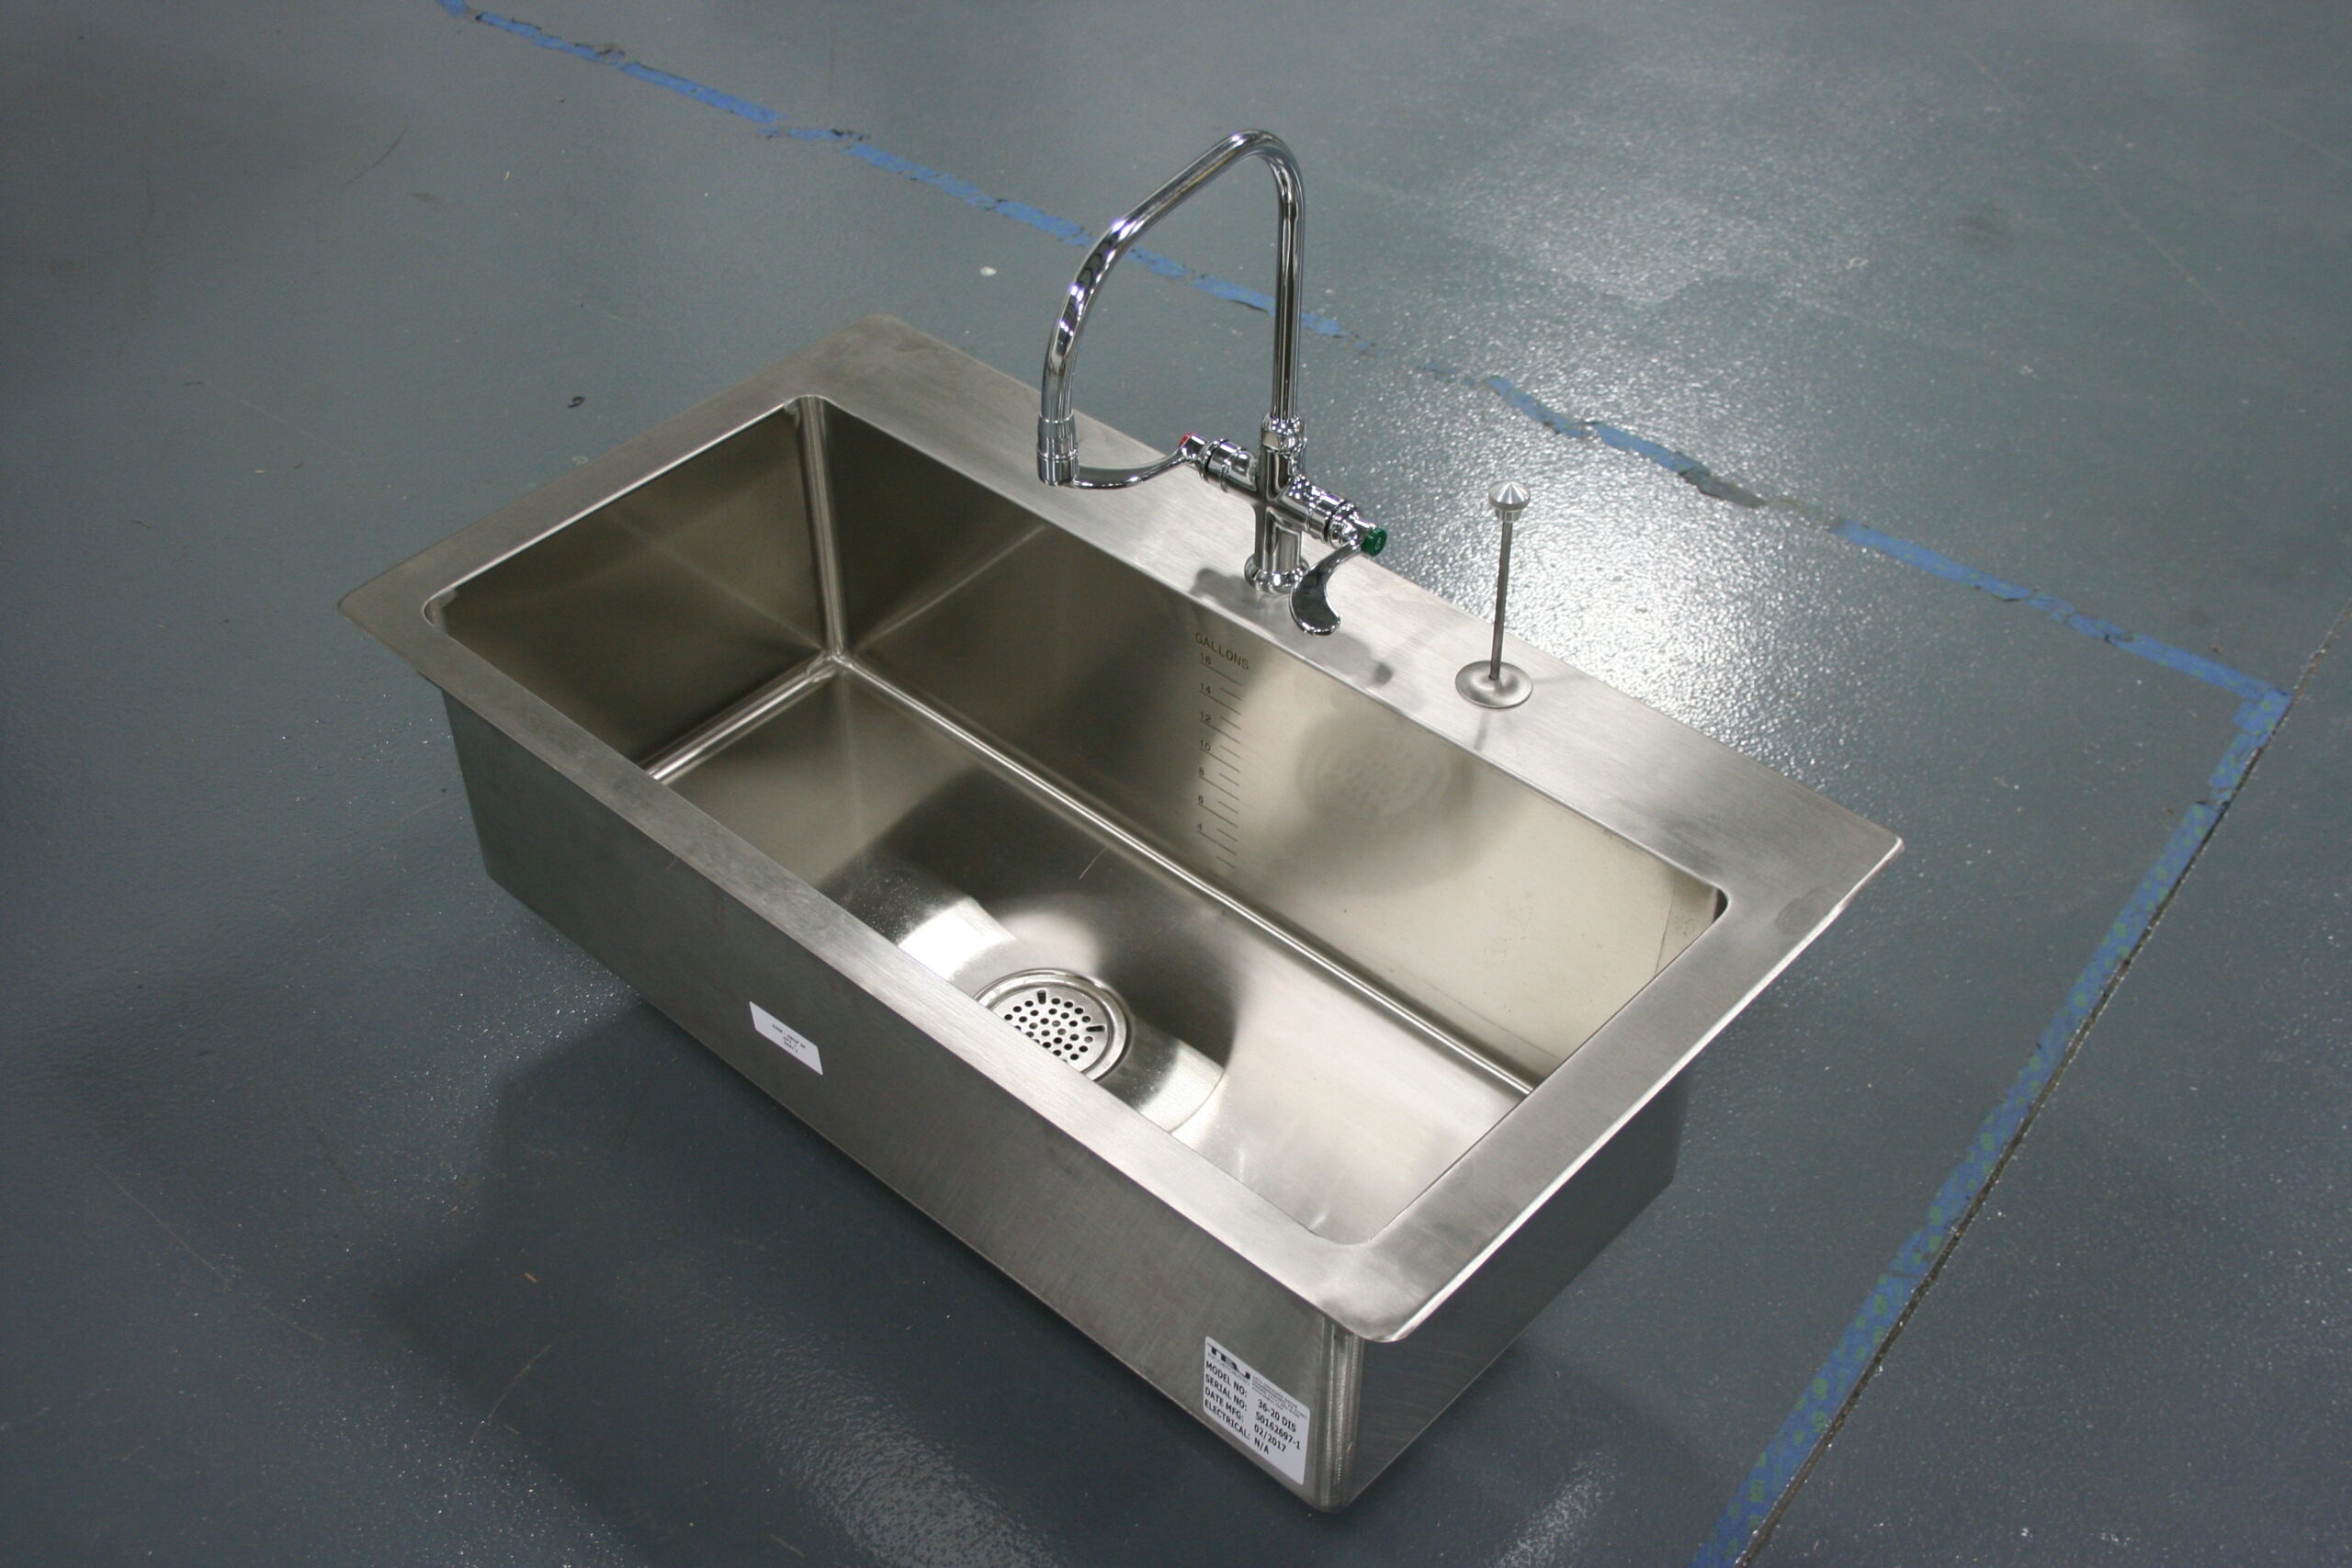 Drop-in Sink Inserts - TBJ Incorporated